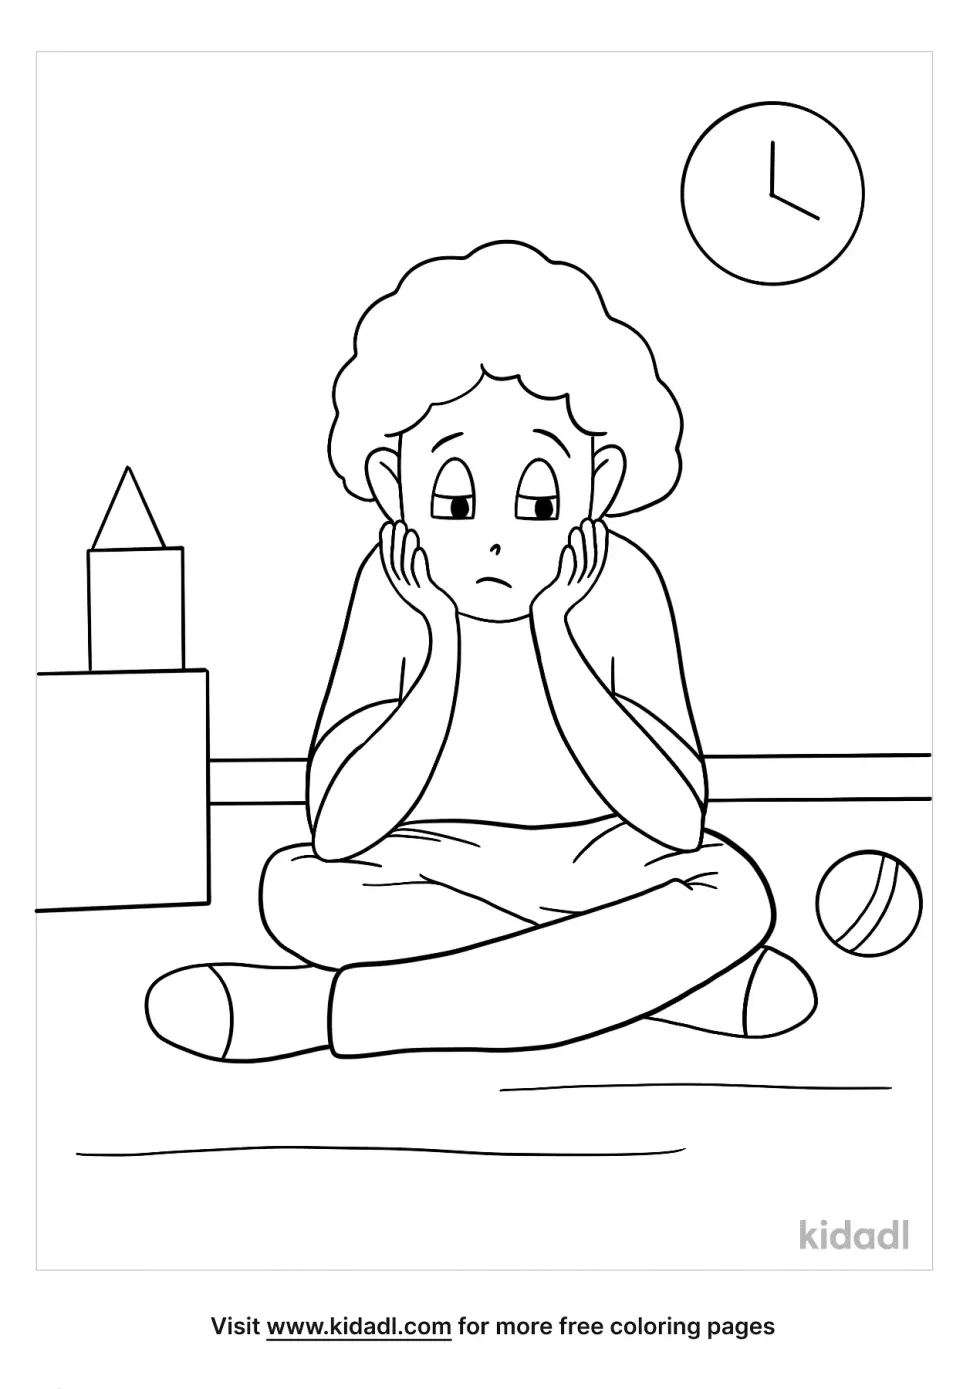 Bored Coloring Page